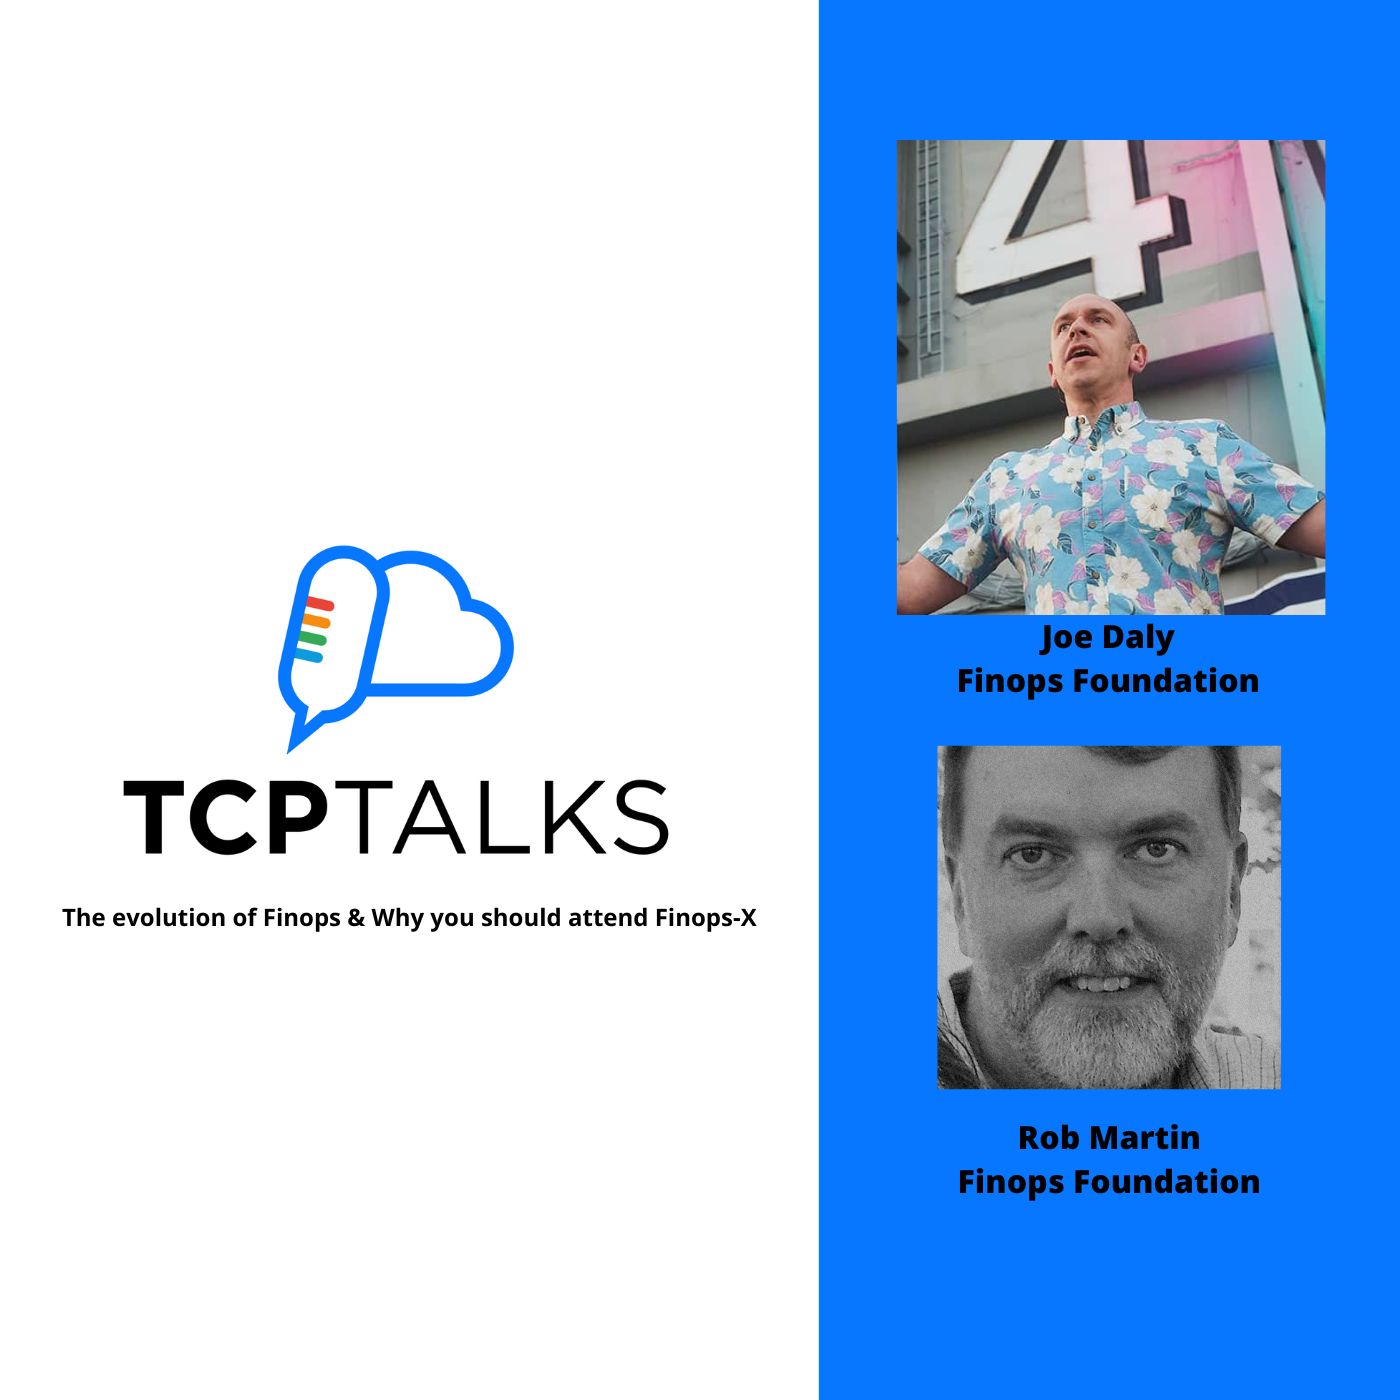 TCP Talks: The evolution of Finops & Why you should attend Finops-X